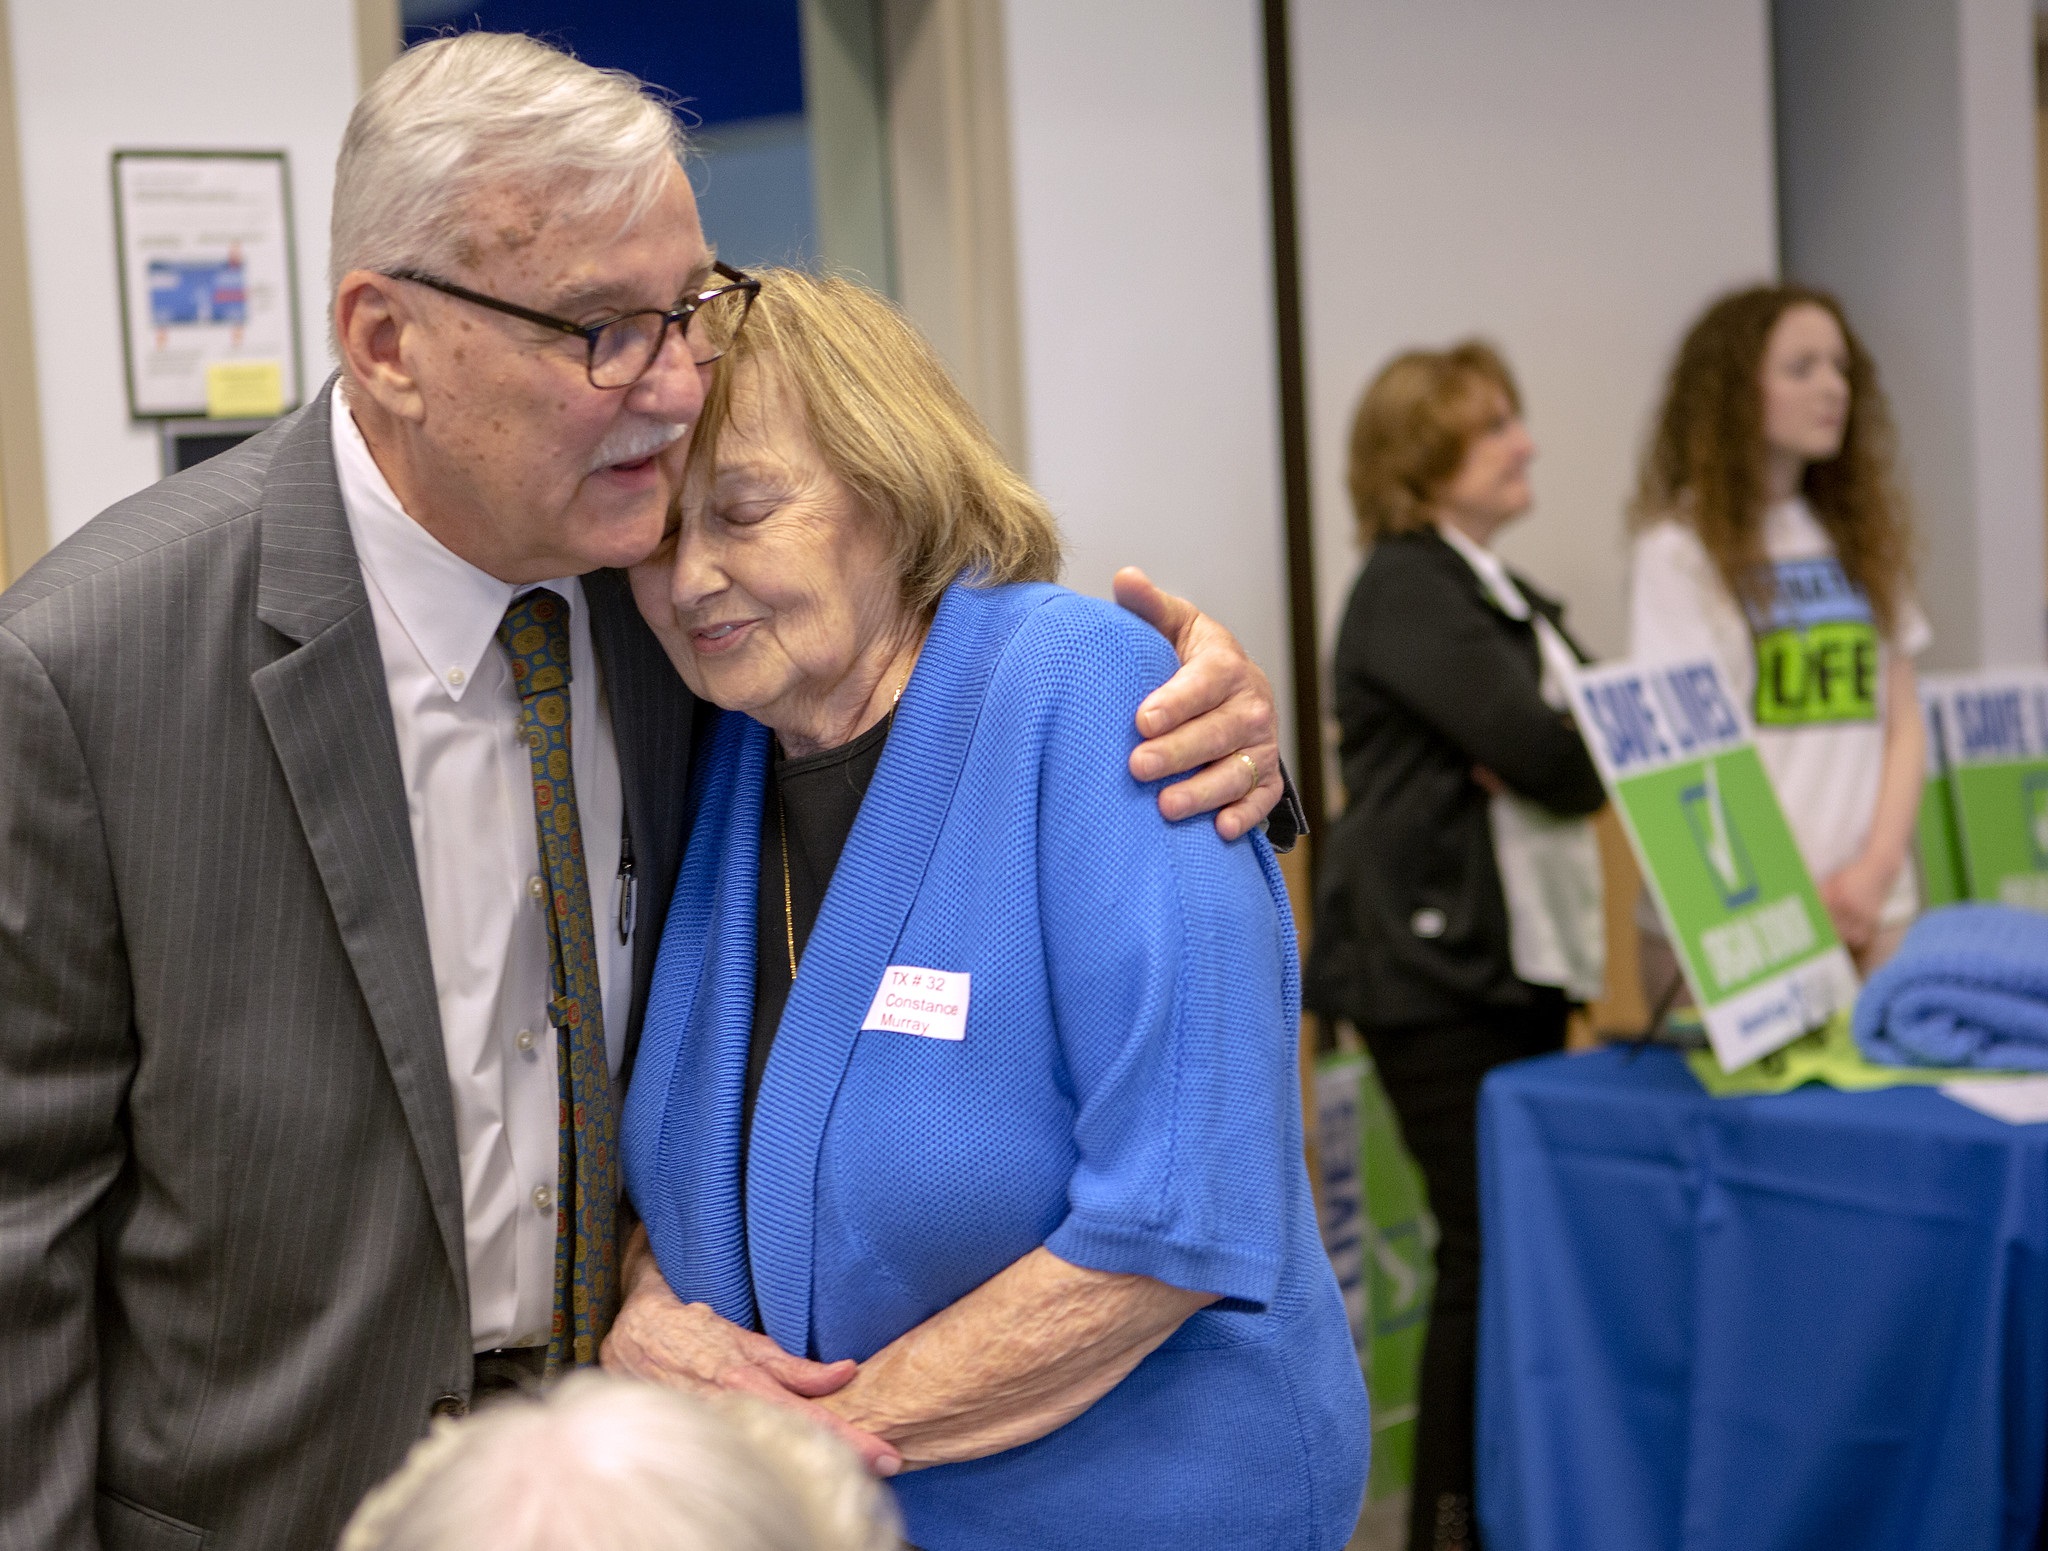 Dr. John Pennock, wearing a sport jacket and tie, wraps an arm around Constance Murray. Both are standing in a room surrounded by other people with signs and T-shirts that say “Save Lives.”